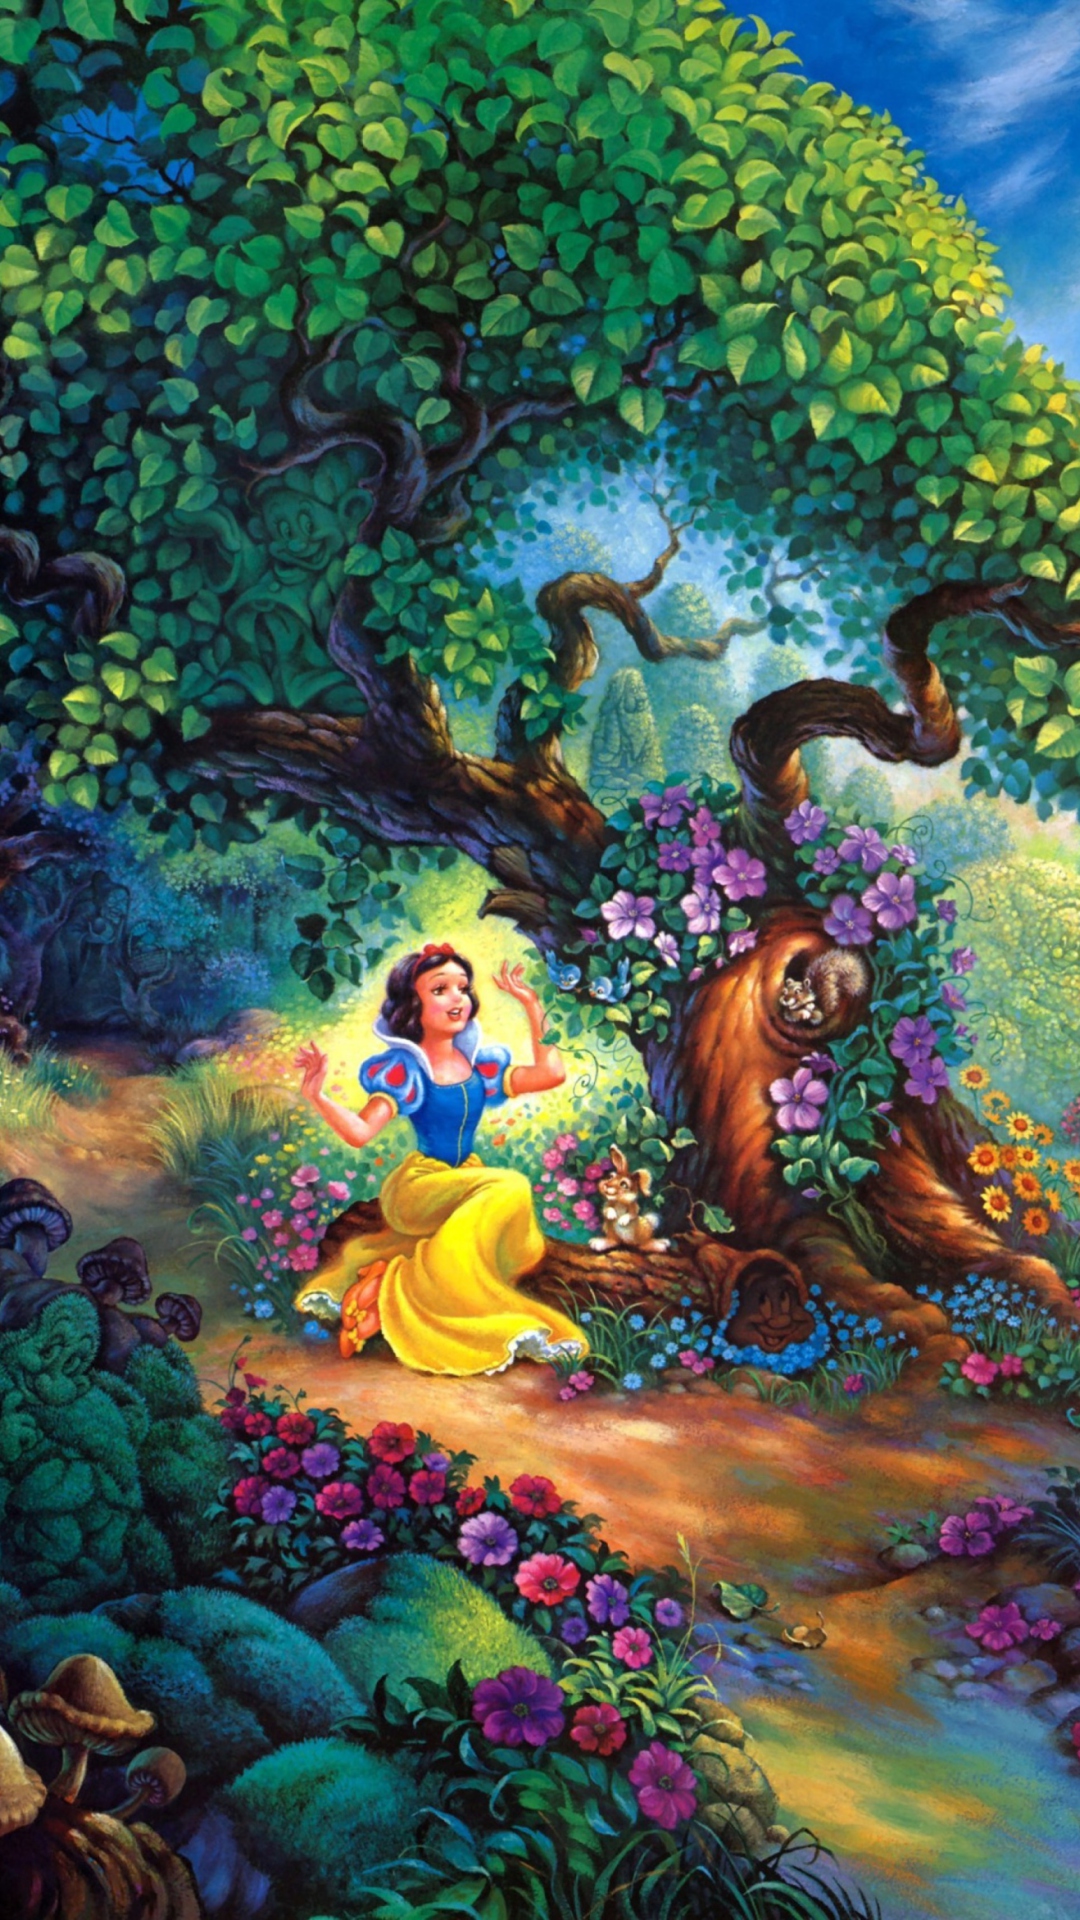 Snow White In Magical Forest wallpaper 1080x1920